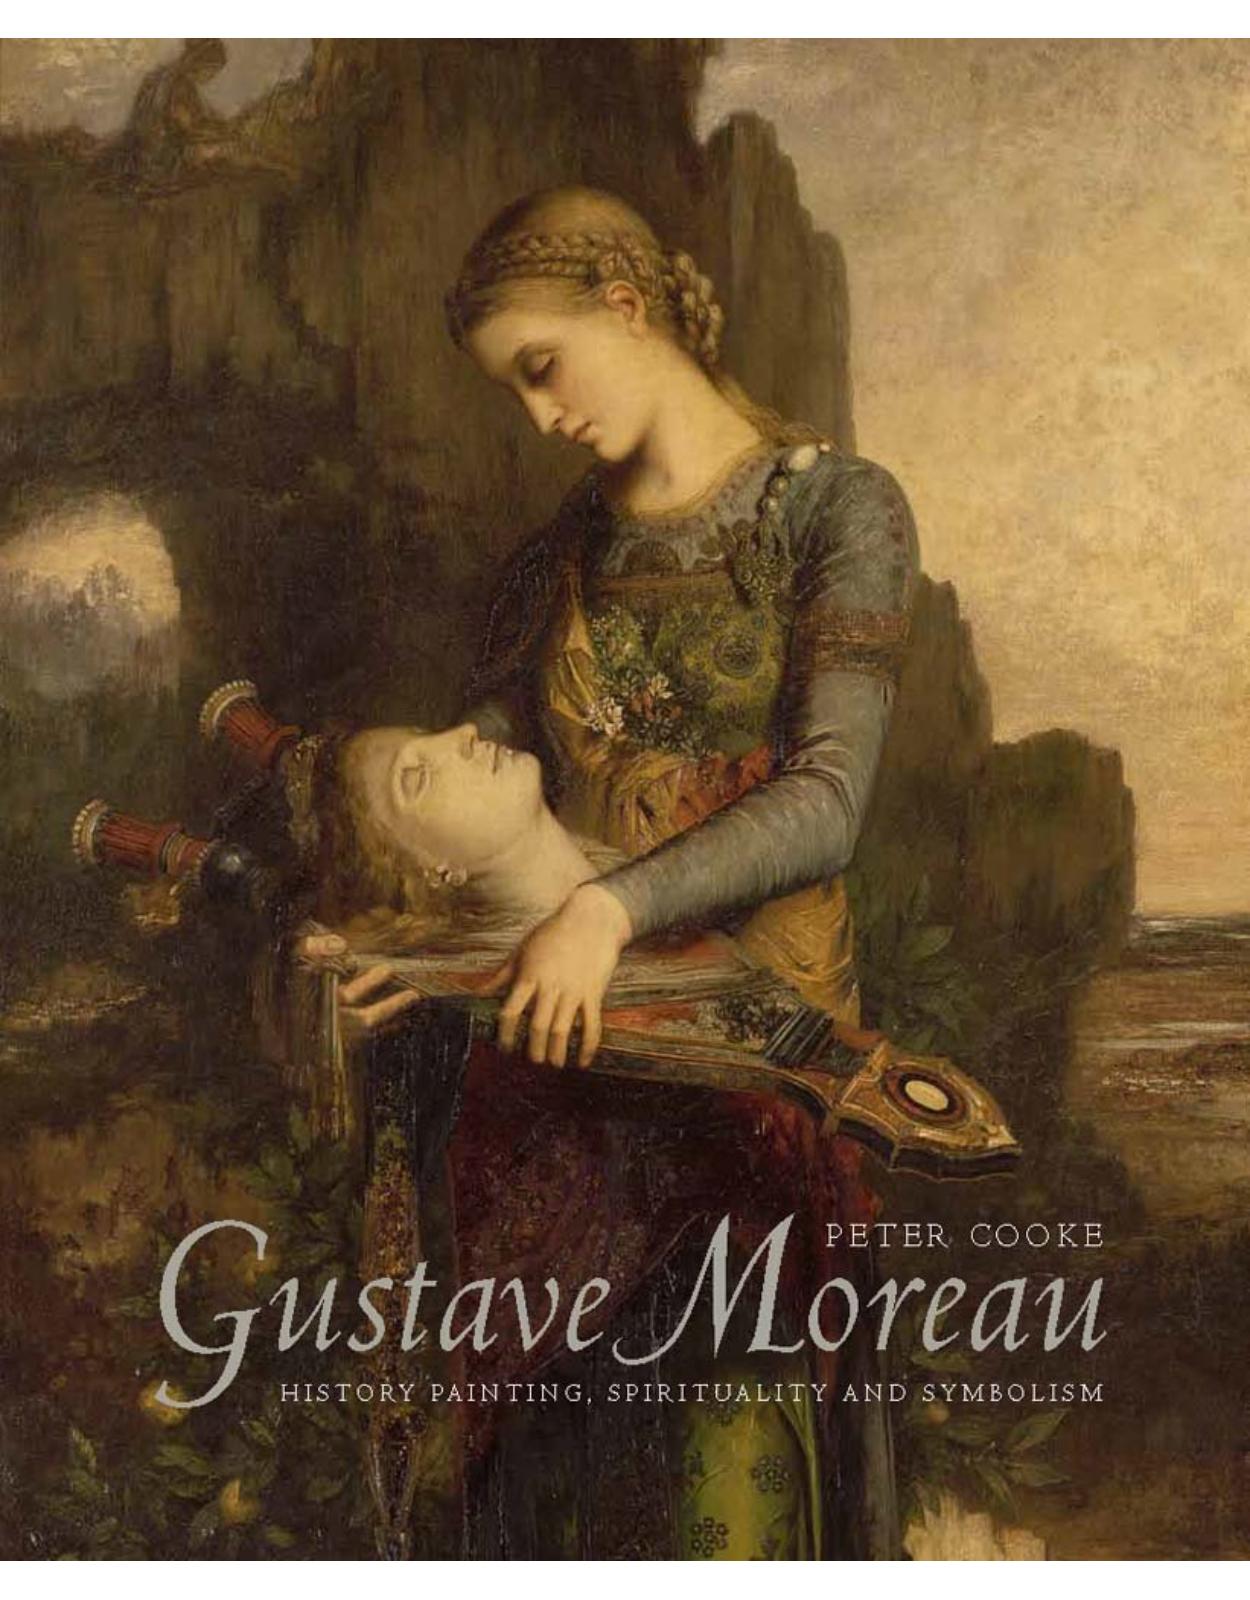 Gustave Moreau. History Painting, Spirituality and Symbolism